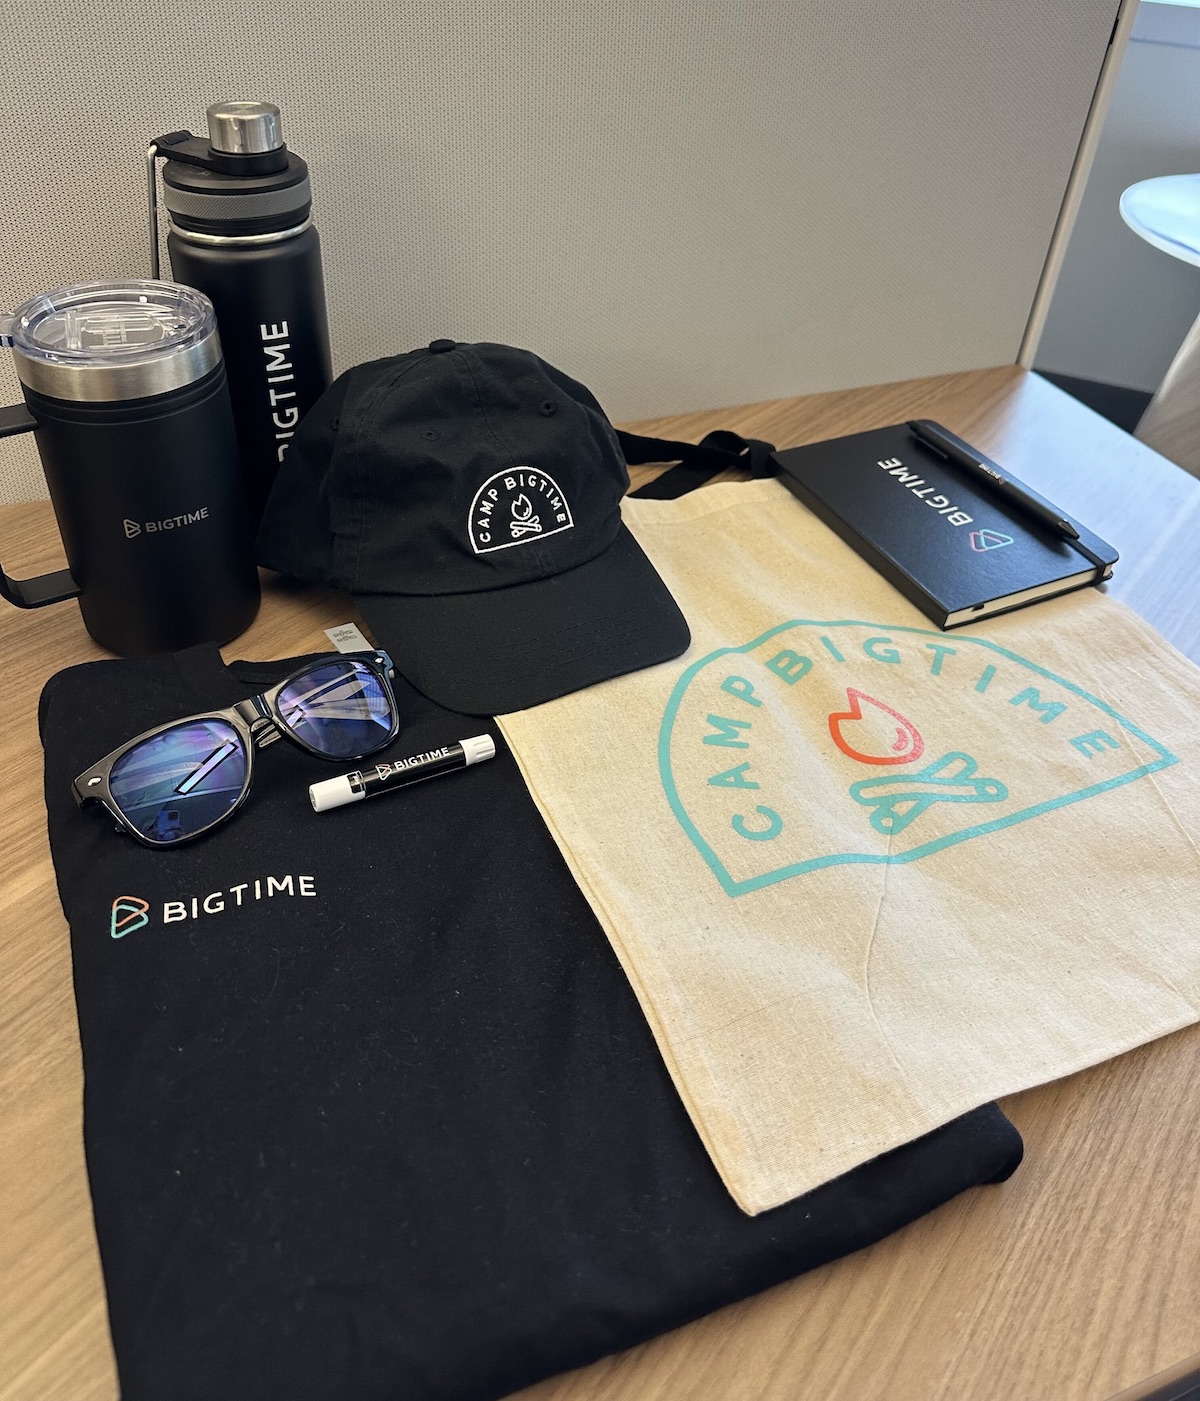 BigTime's Camp BigTime swag includes a t-shirt, water bottle and canvas bag